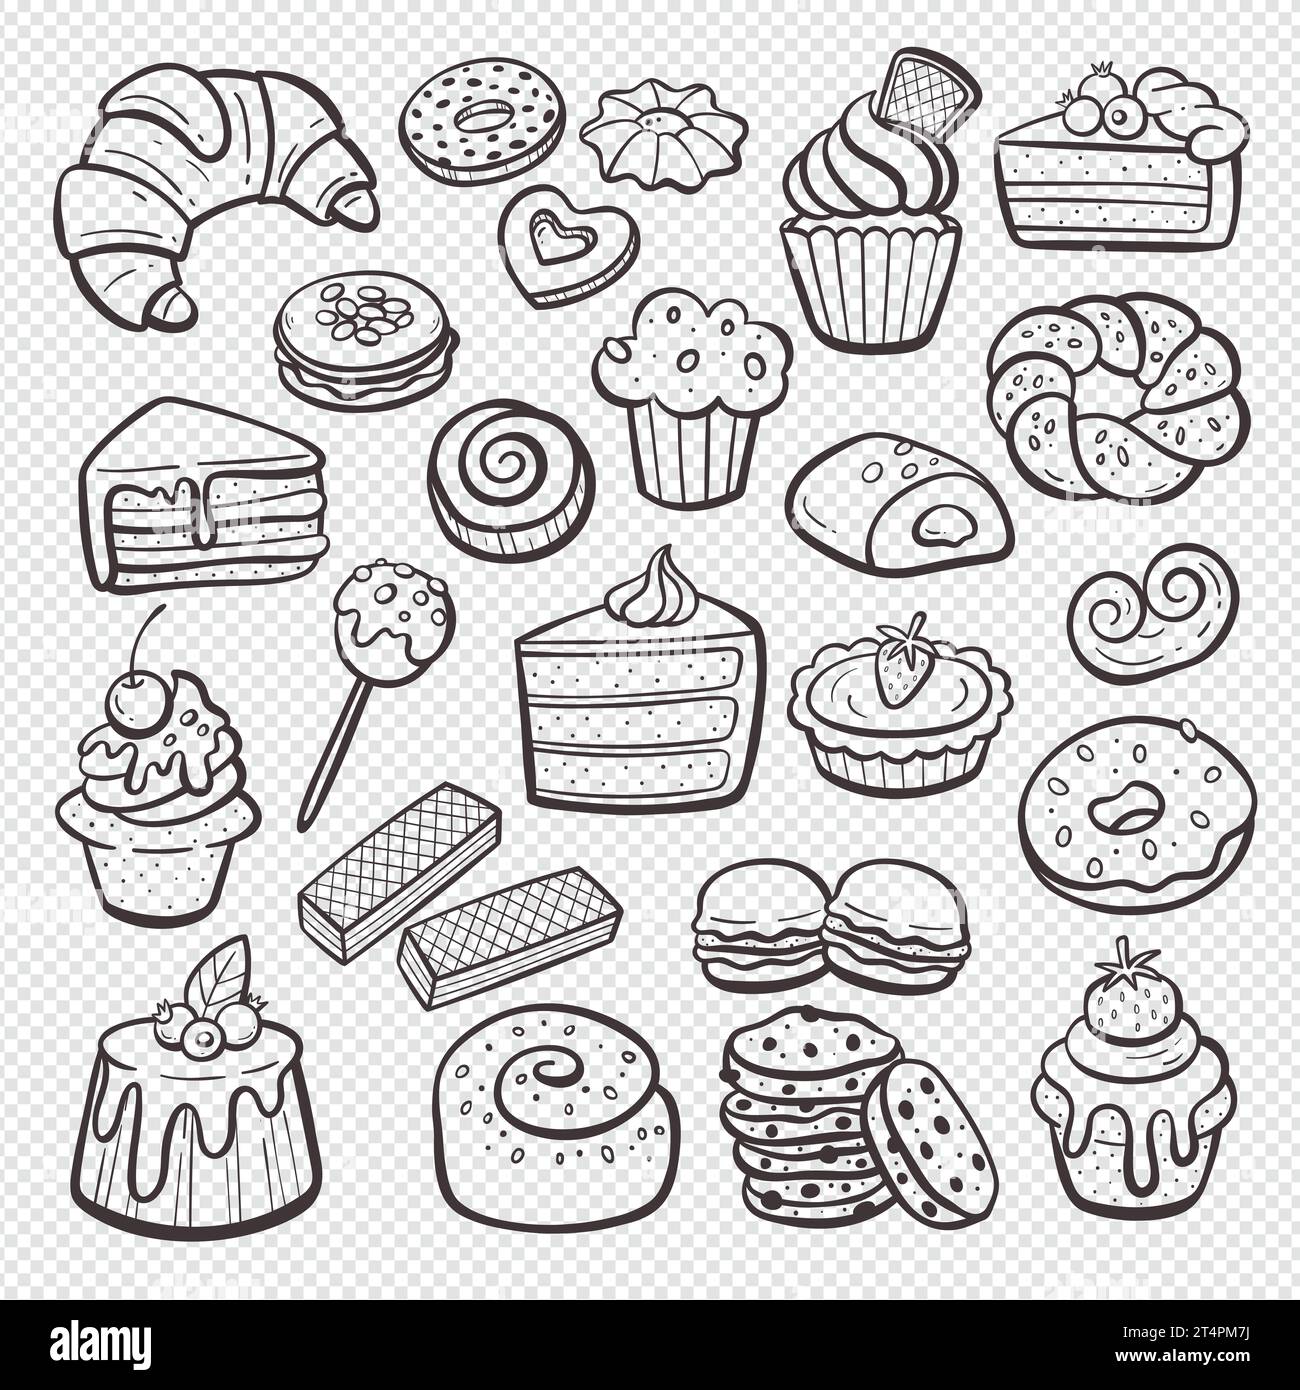 Dessert products isolated on white background. Cupcakes, sweets, ice creams, and pastries. Hand-drawn illustration. Isolated doodle items. Vector illu Stock Vector